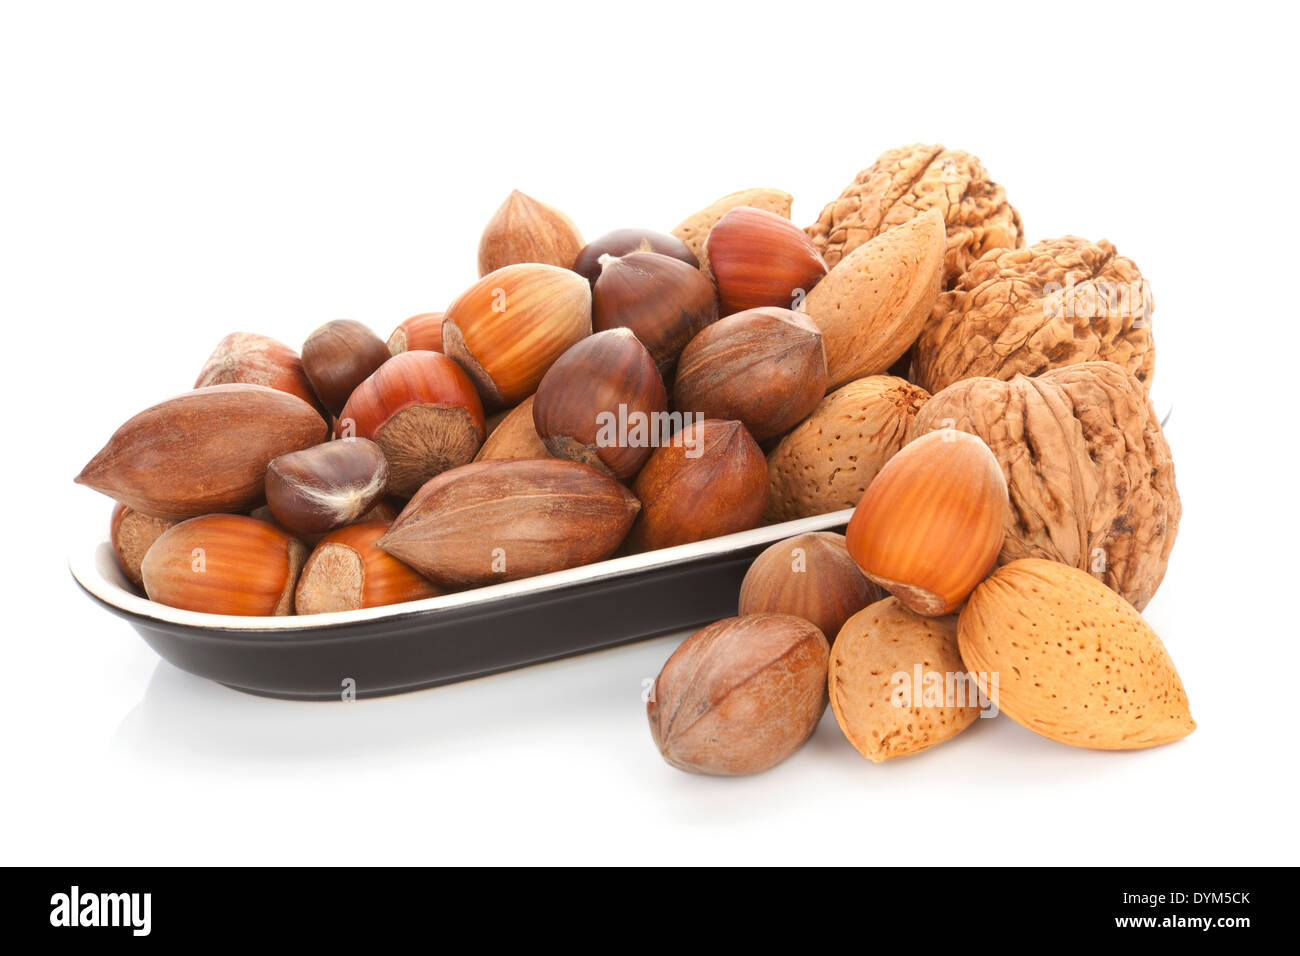 Various nuts, walnuts, hazelnuts, almond and chestnuts in black bowl isolated on white background. Seasonal healthy nuts. Stock Photo